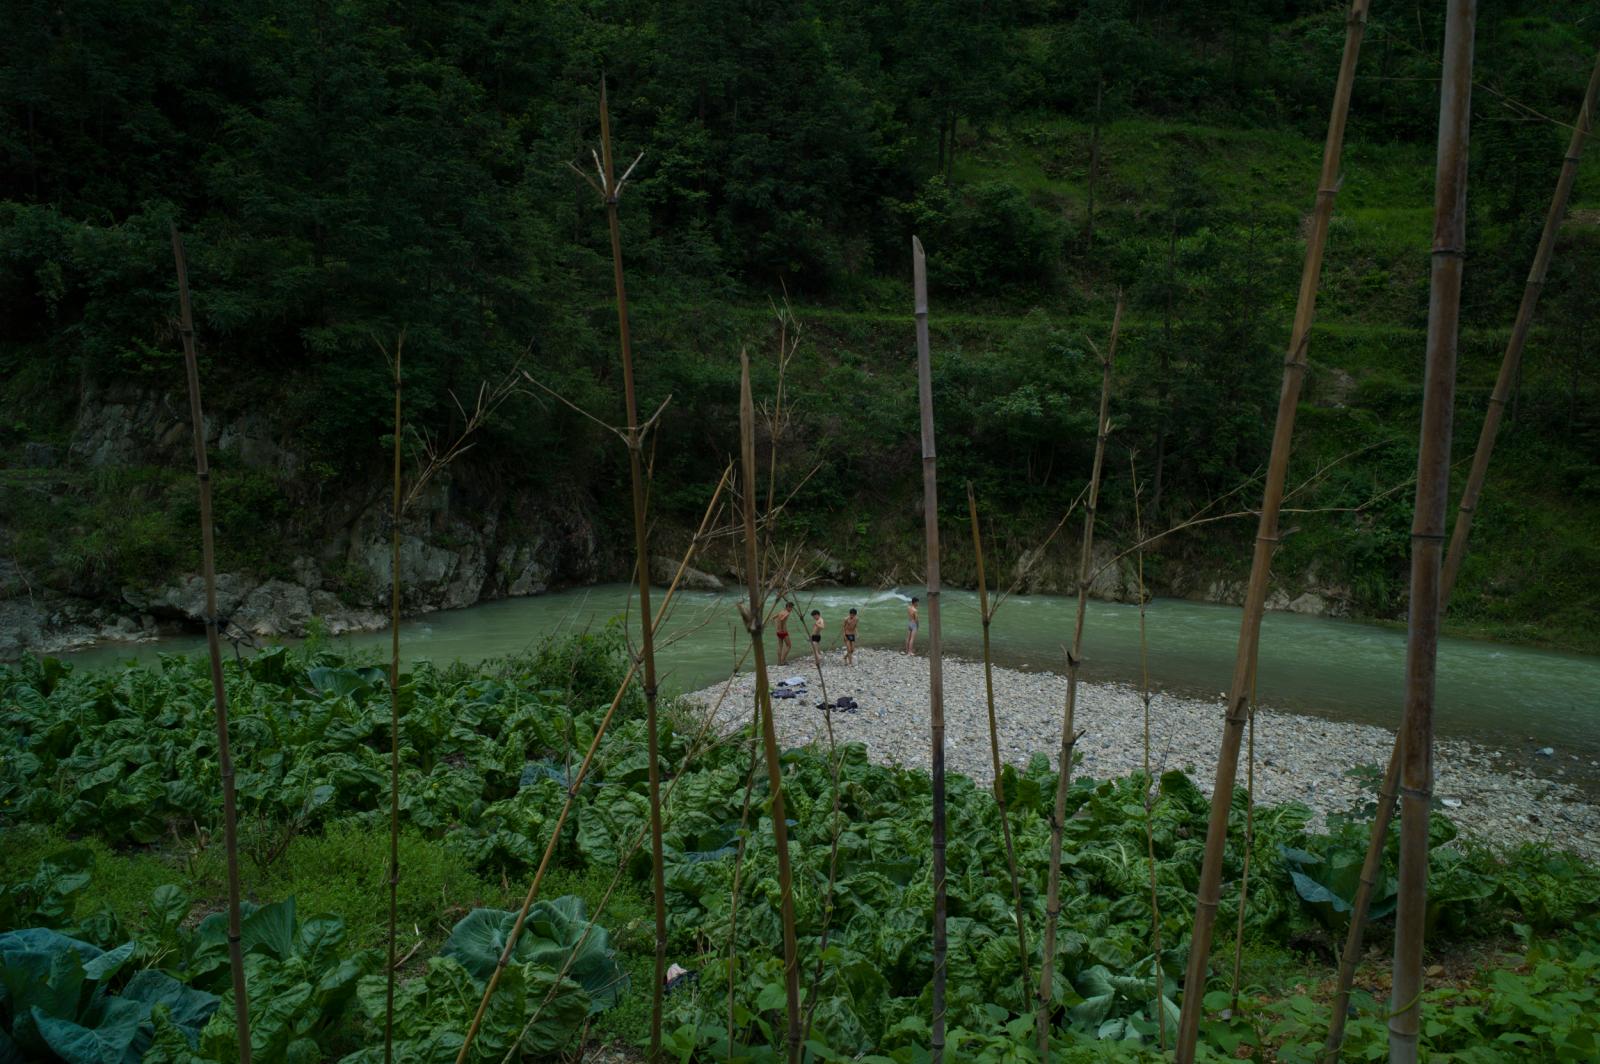 Youths from a nearby village swimming in the river.